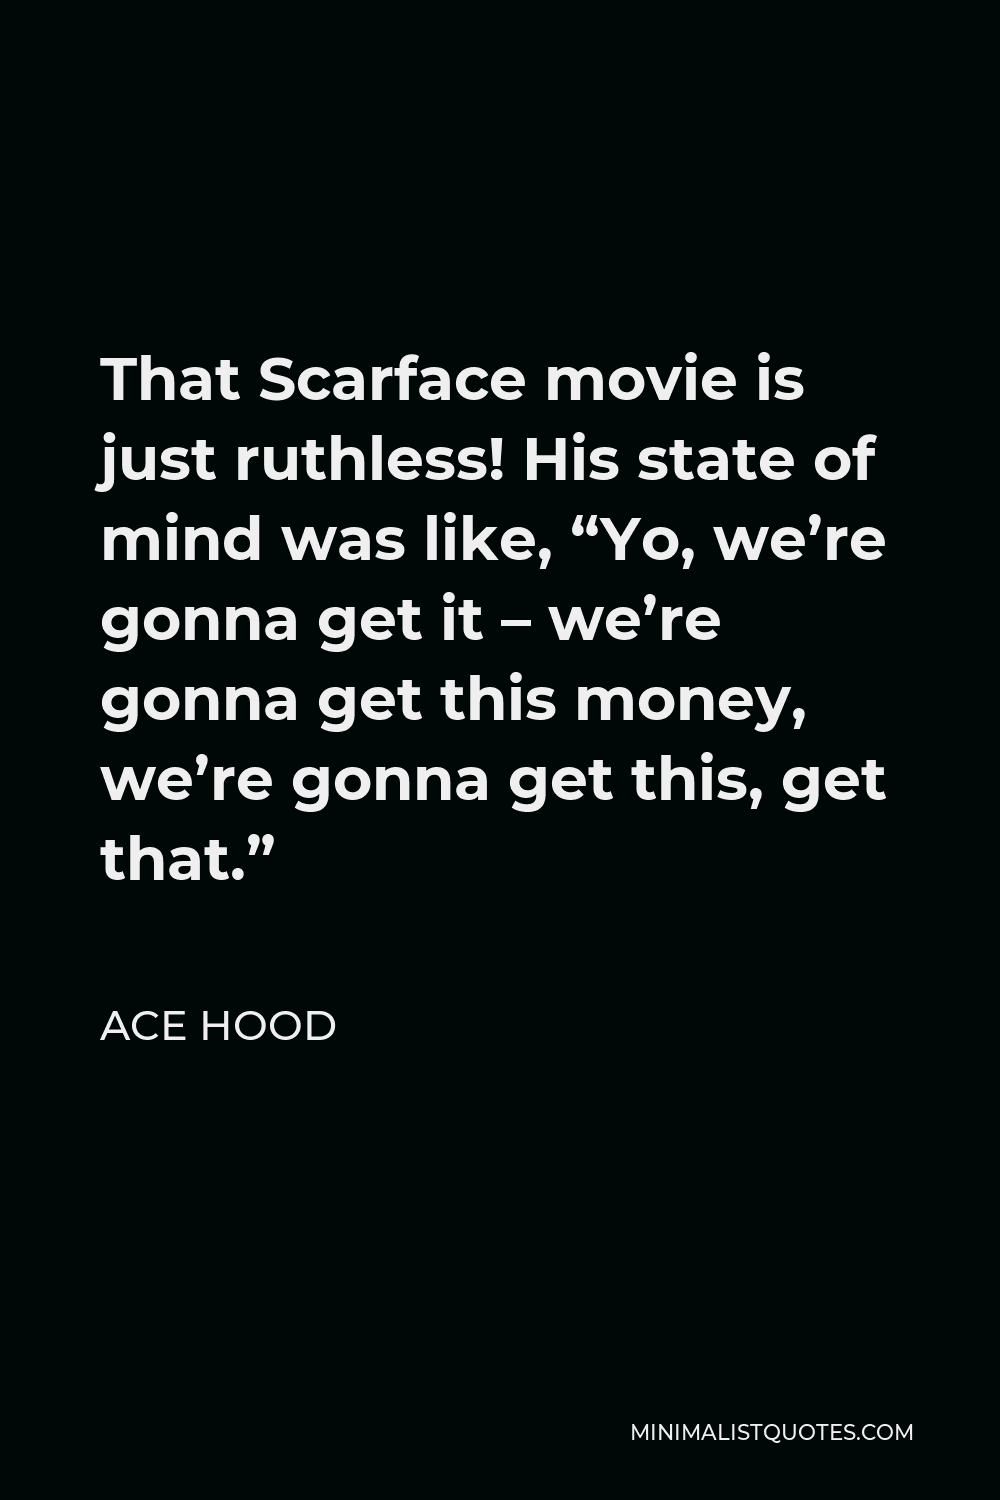 Ace Hood Quote - That Scarface movie is just ruthless! His state of mind was like, “Yo, we’re gonna get it – we’re gonna get this money, we’re gonna get this, get that.”